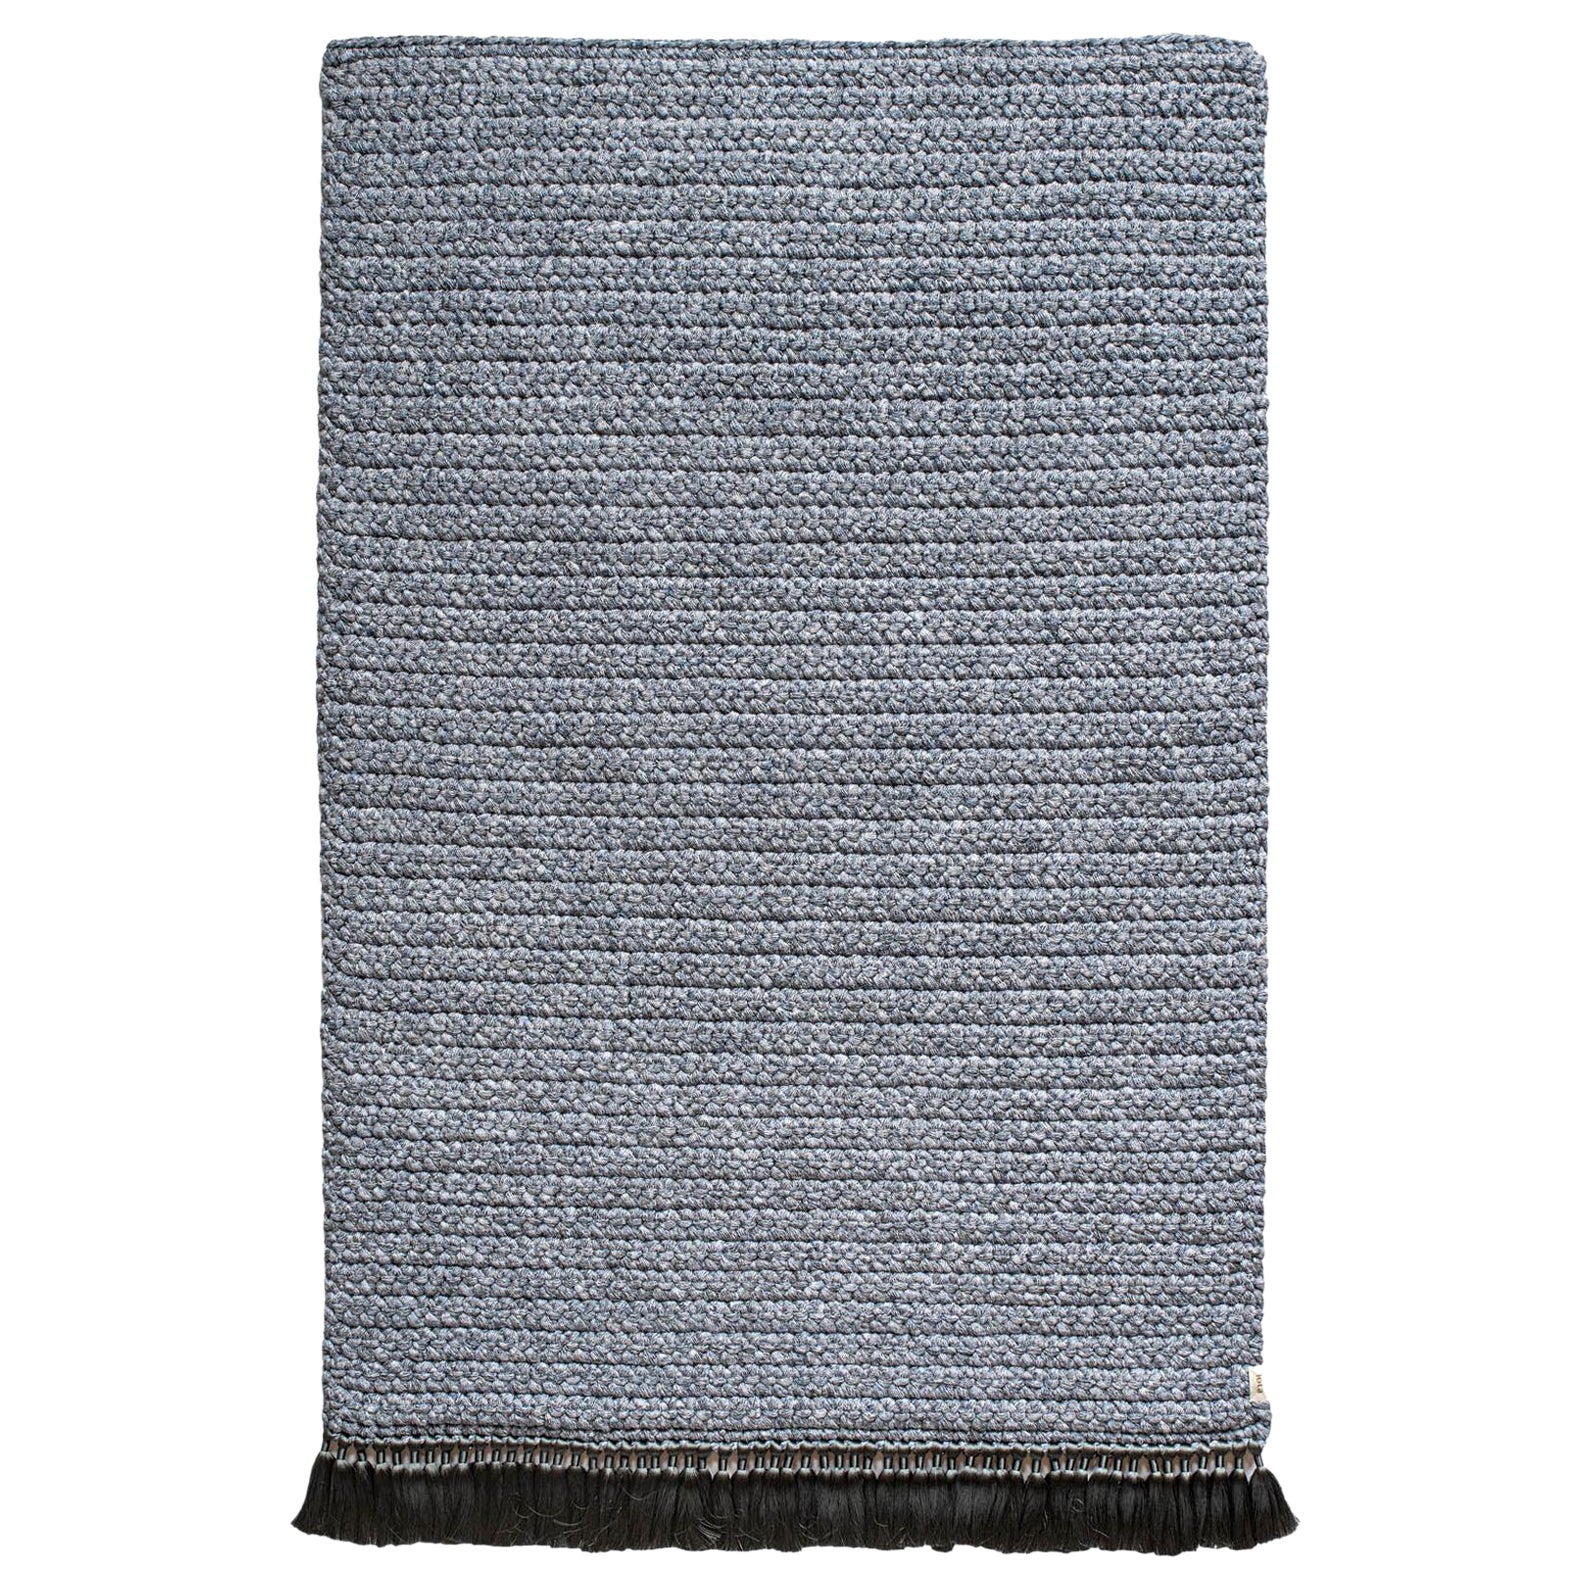 Handmade Crochet Thick Rug in Blue Grey Made of Cotton & Polyester by Iota For Sale